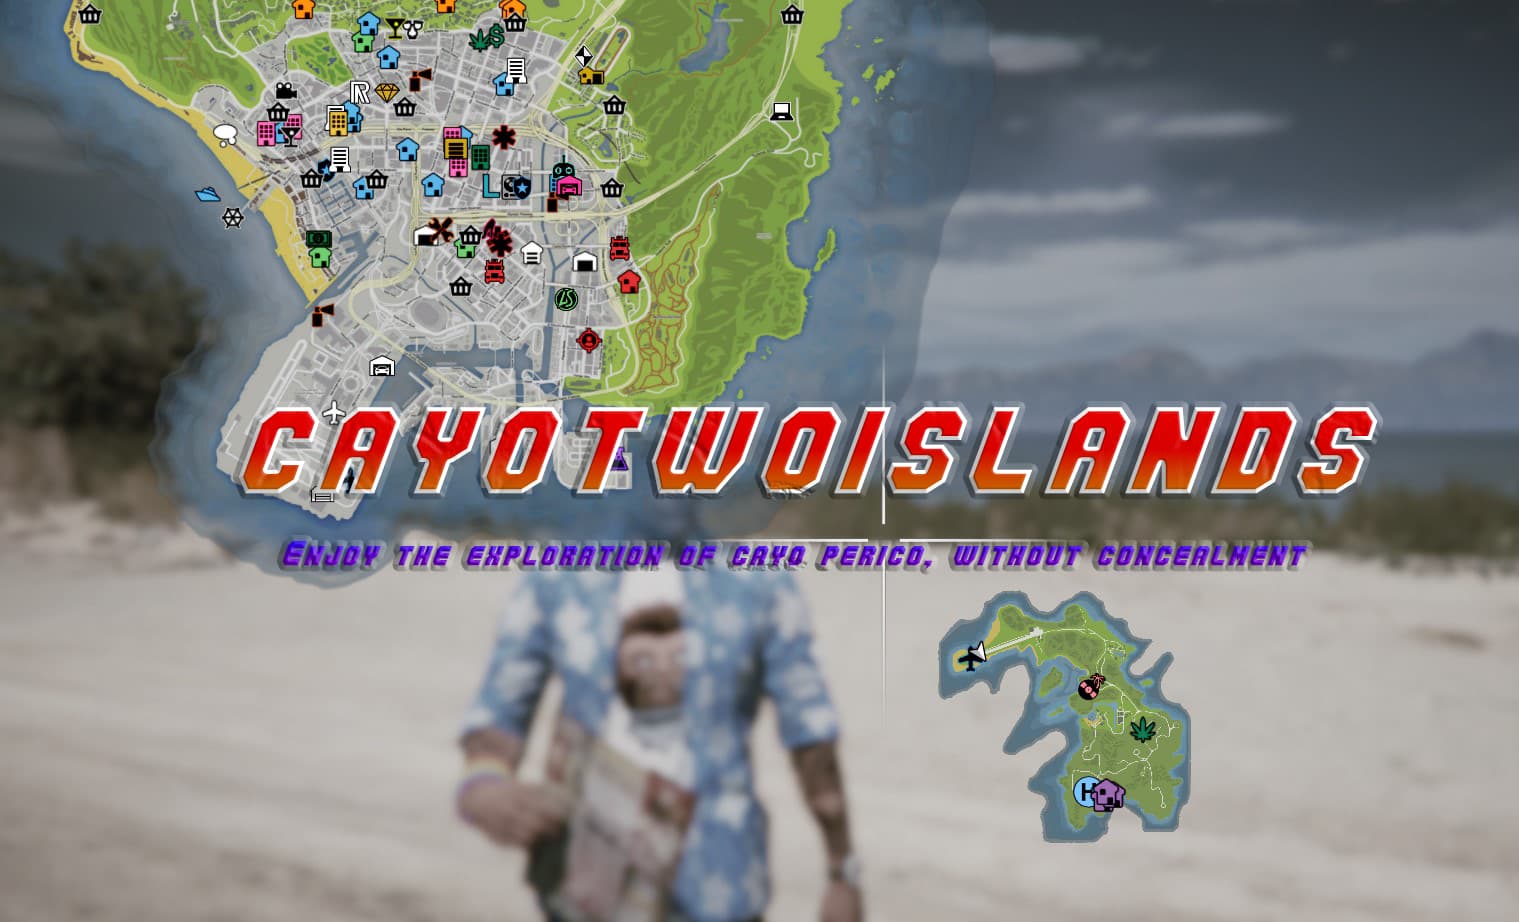 How to install Satellite View Map with colorful Blips (GTA 5 MODS) 2022 